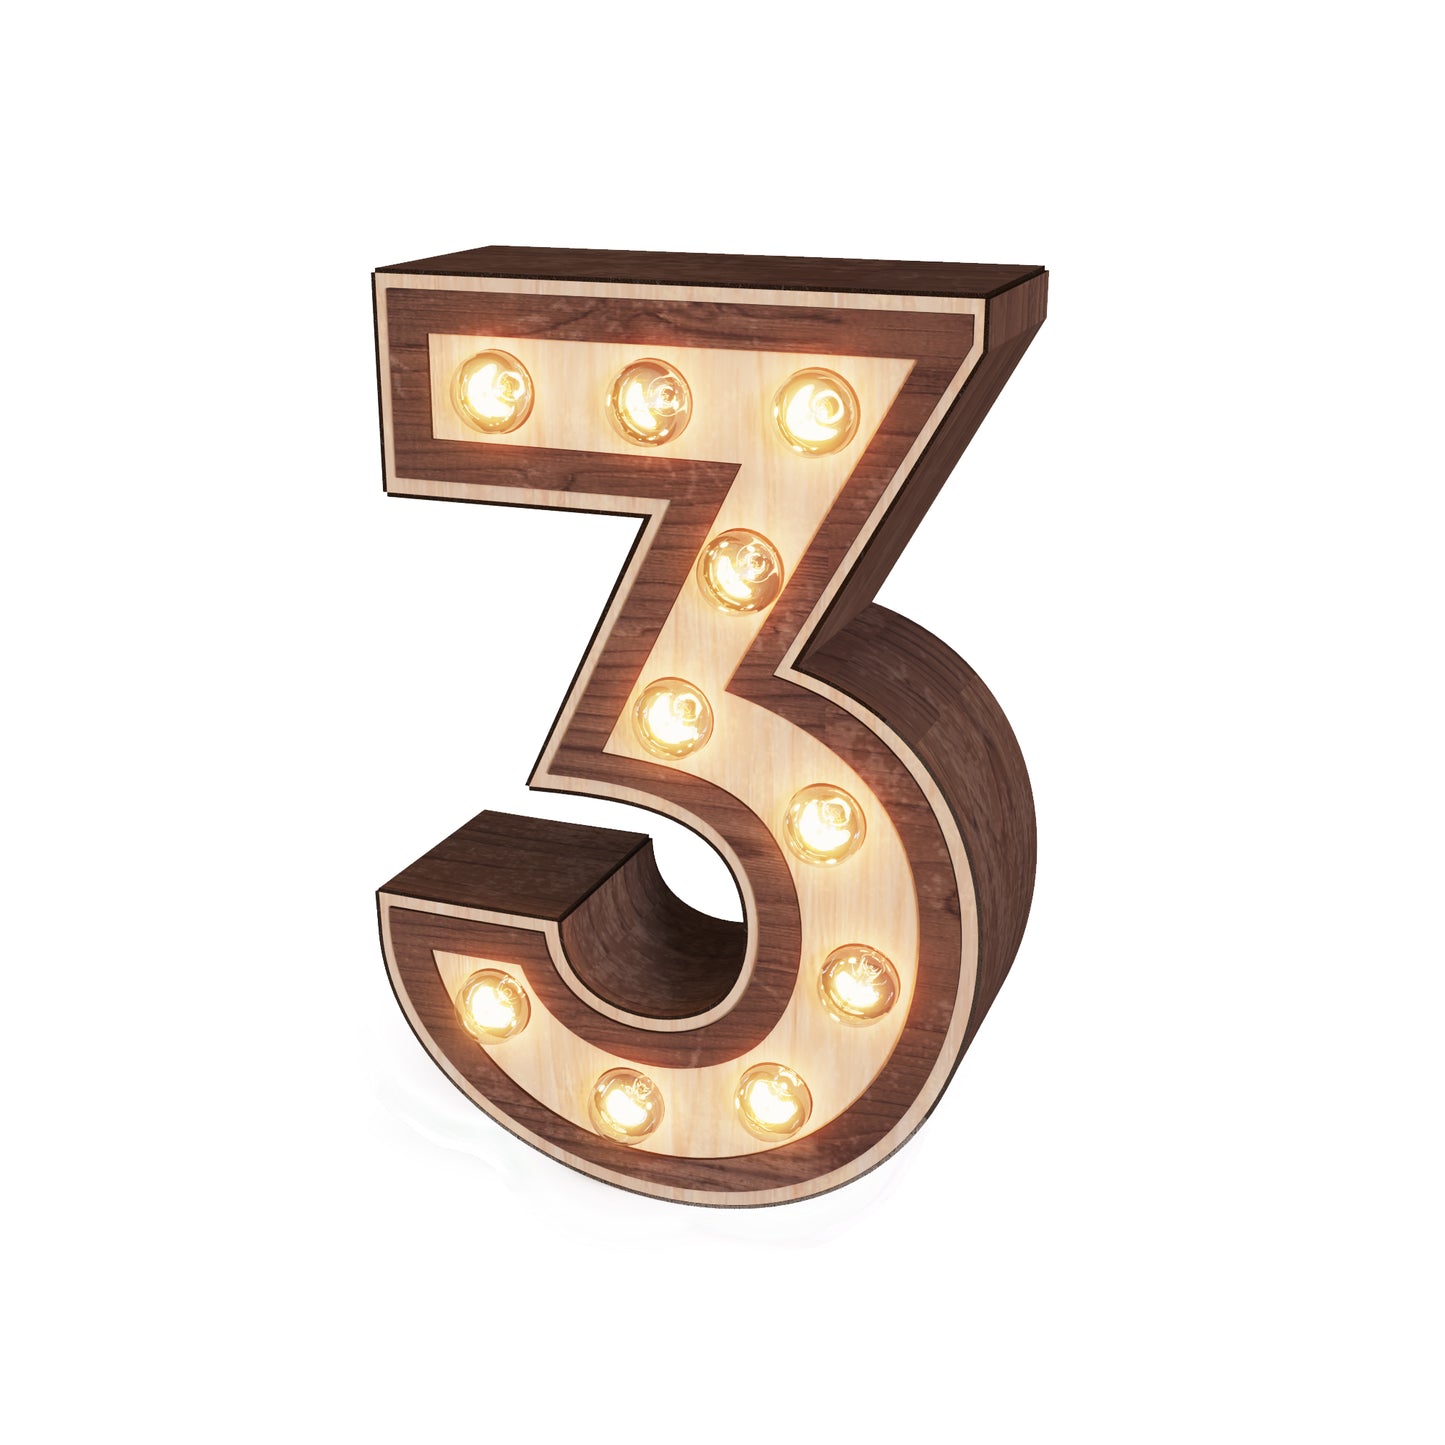 Light-up Marquee Number Display "3"